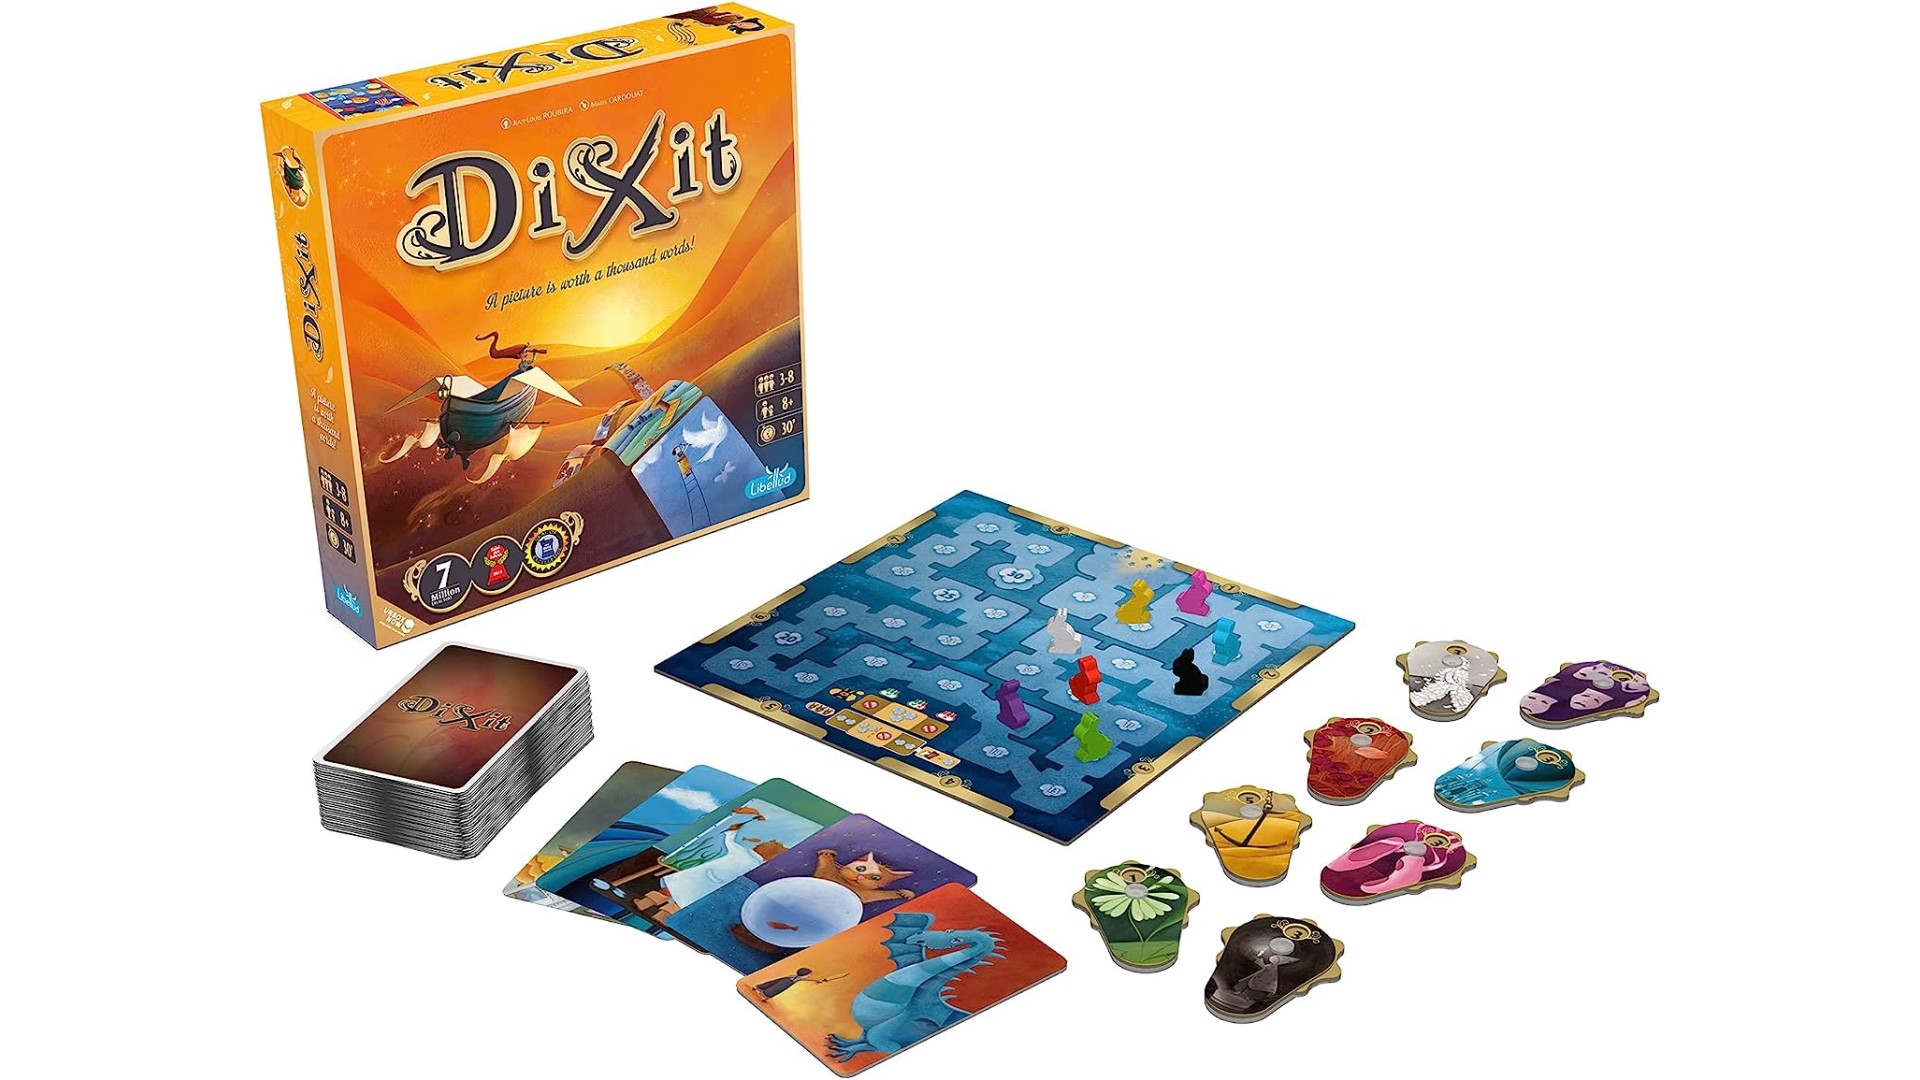 Top Board Games You Can Play Online During Isolation